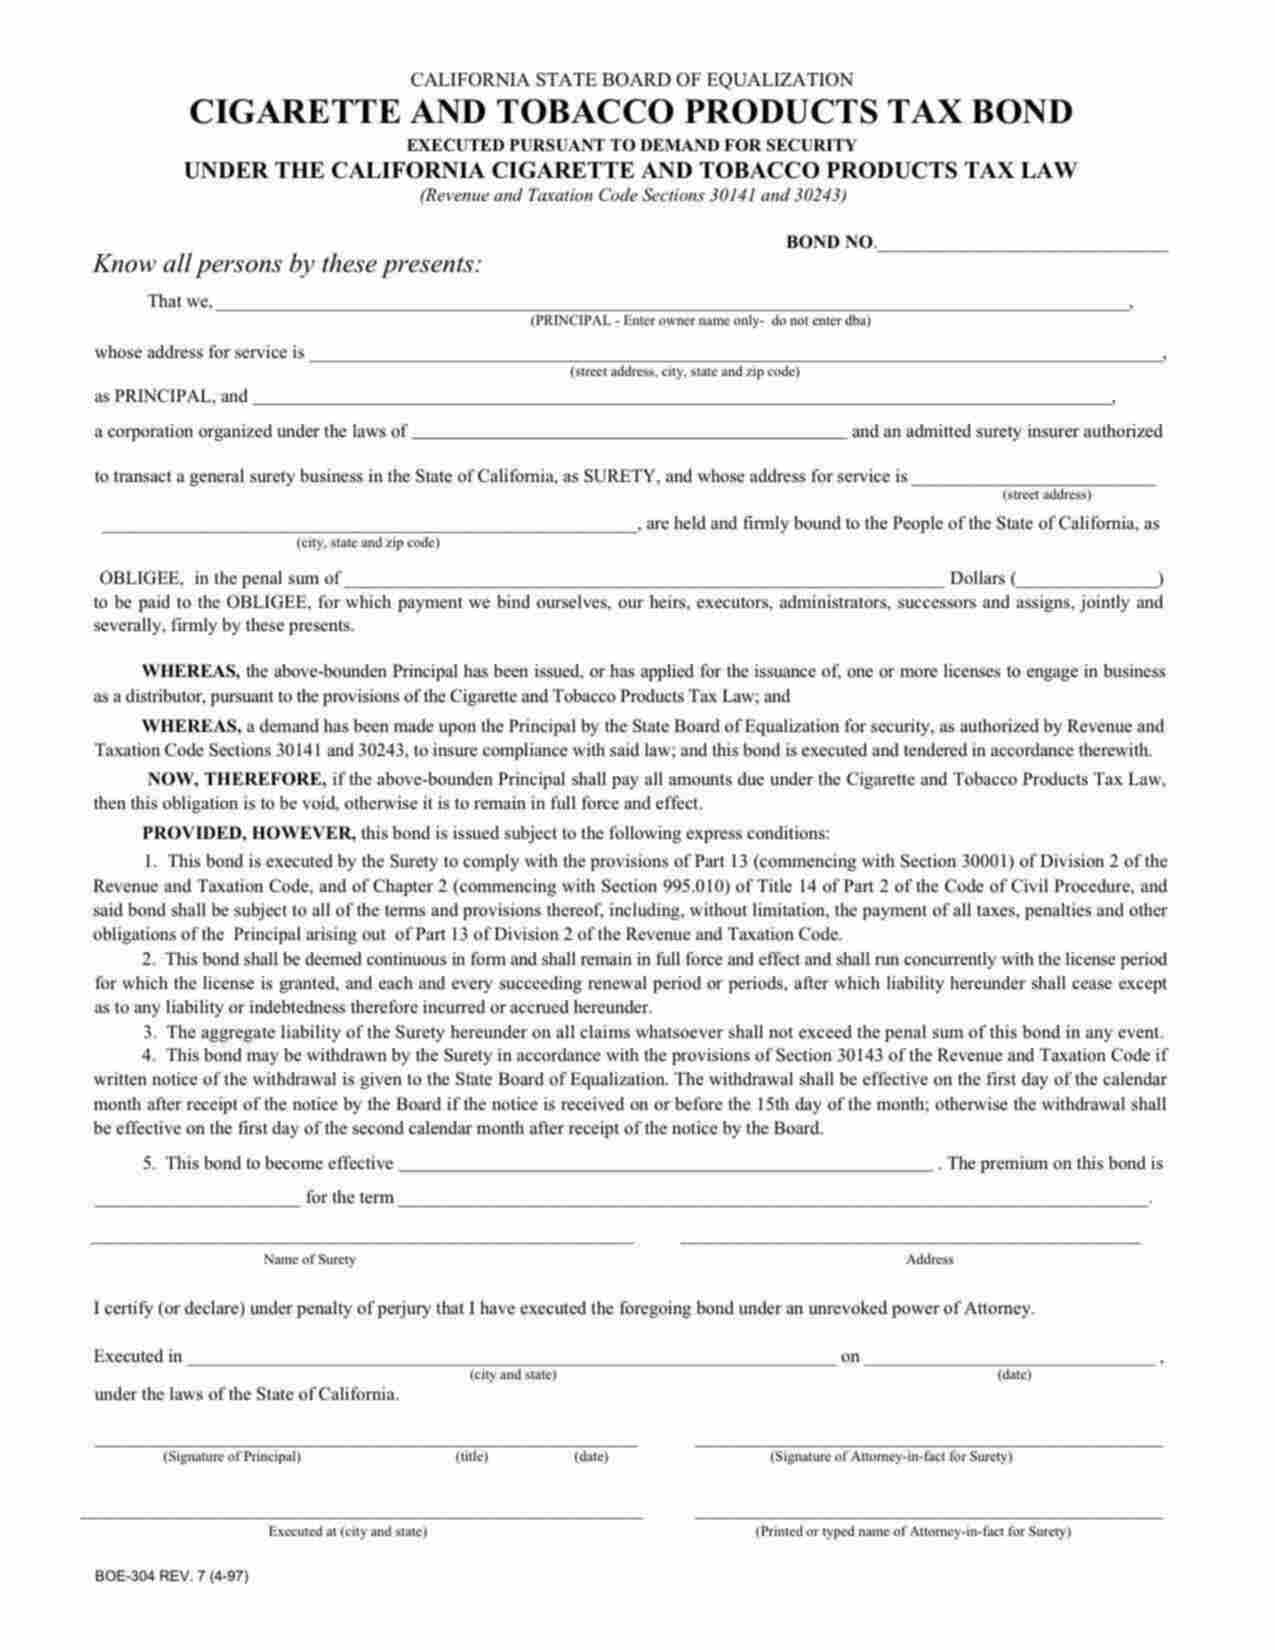 California Cigarette and Tobacco Products Tax Bond Form